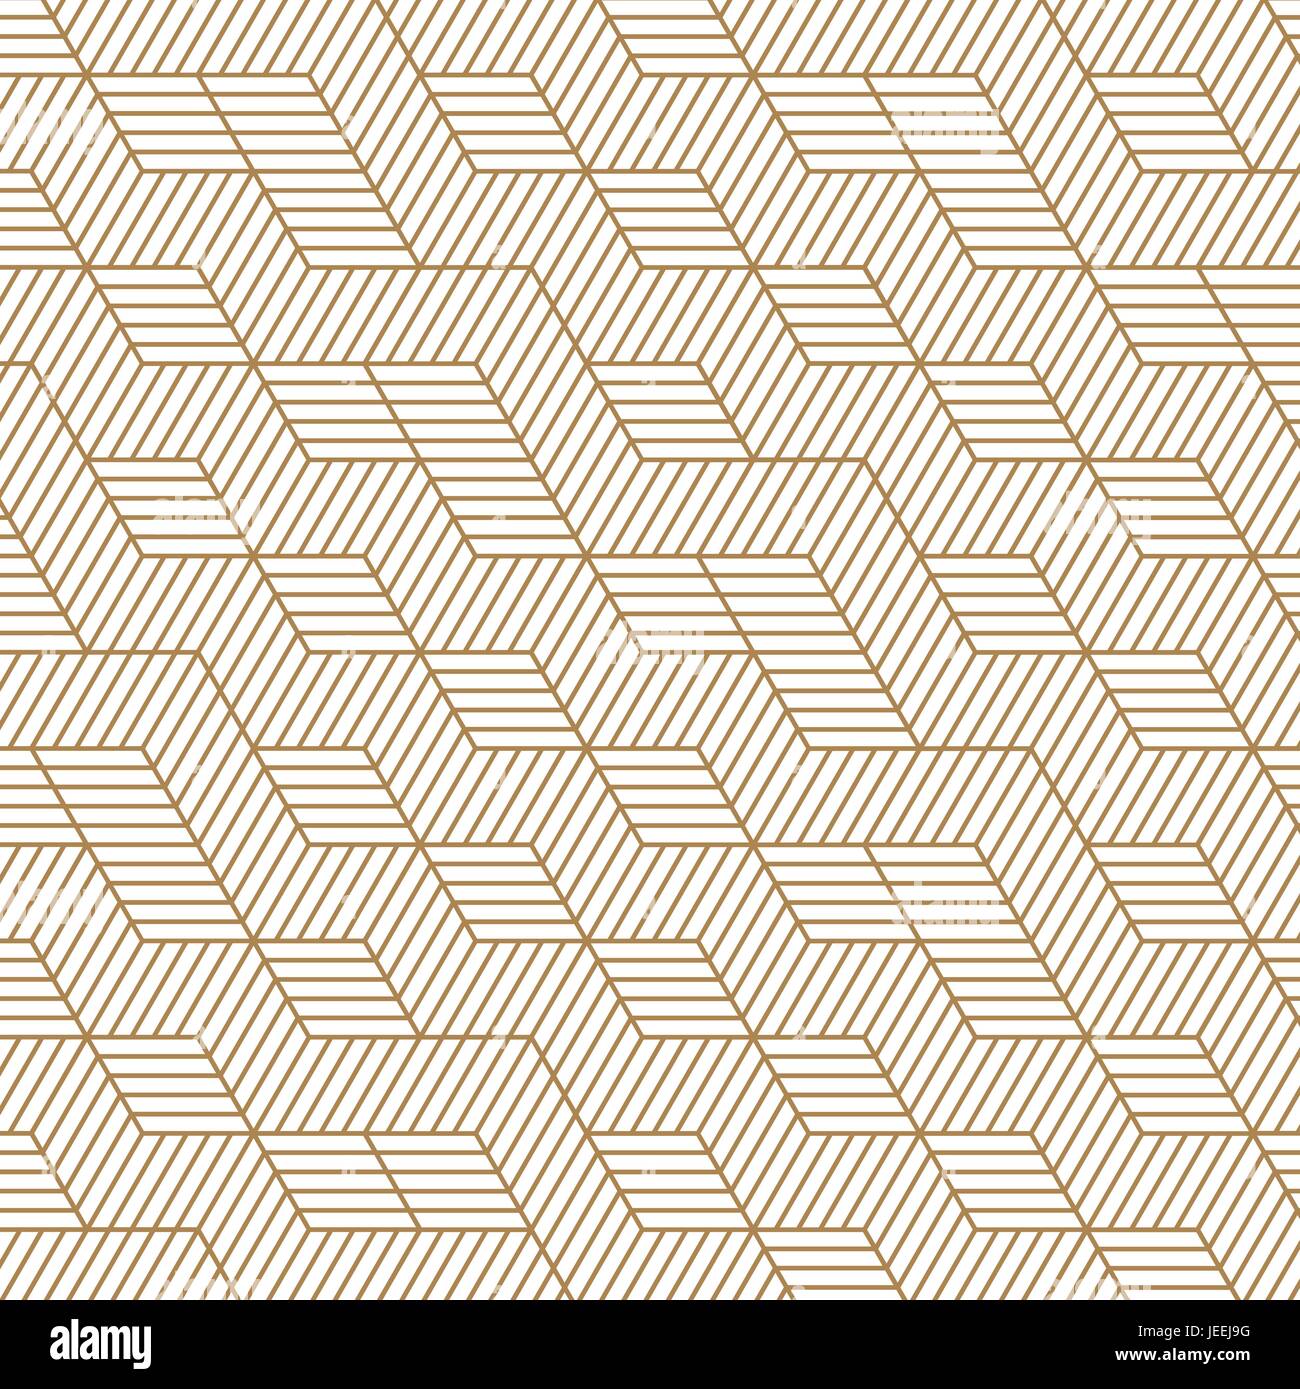 White and gold background. Tile design pattern vector and illustration. Stock Vector